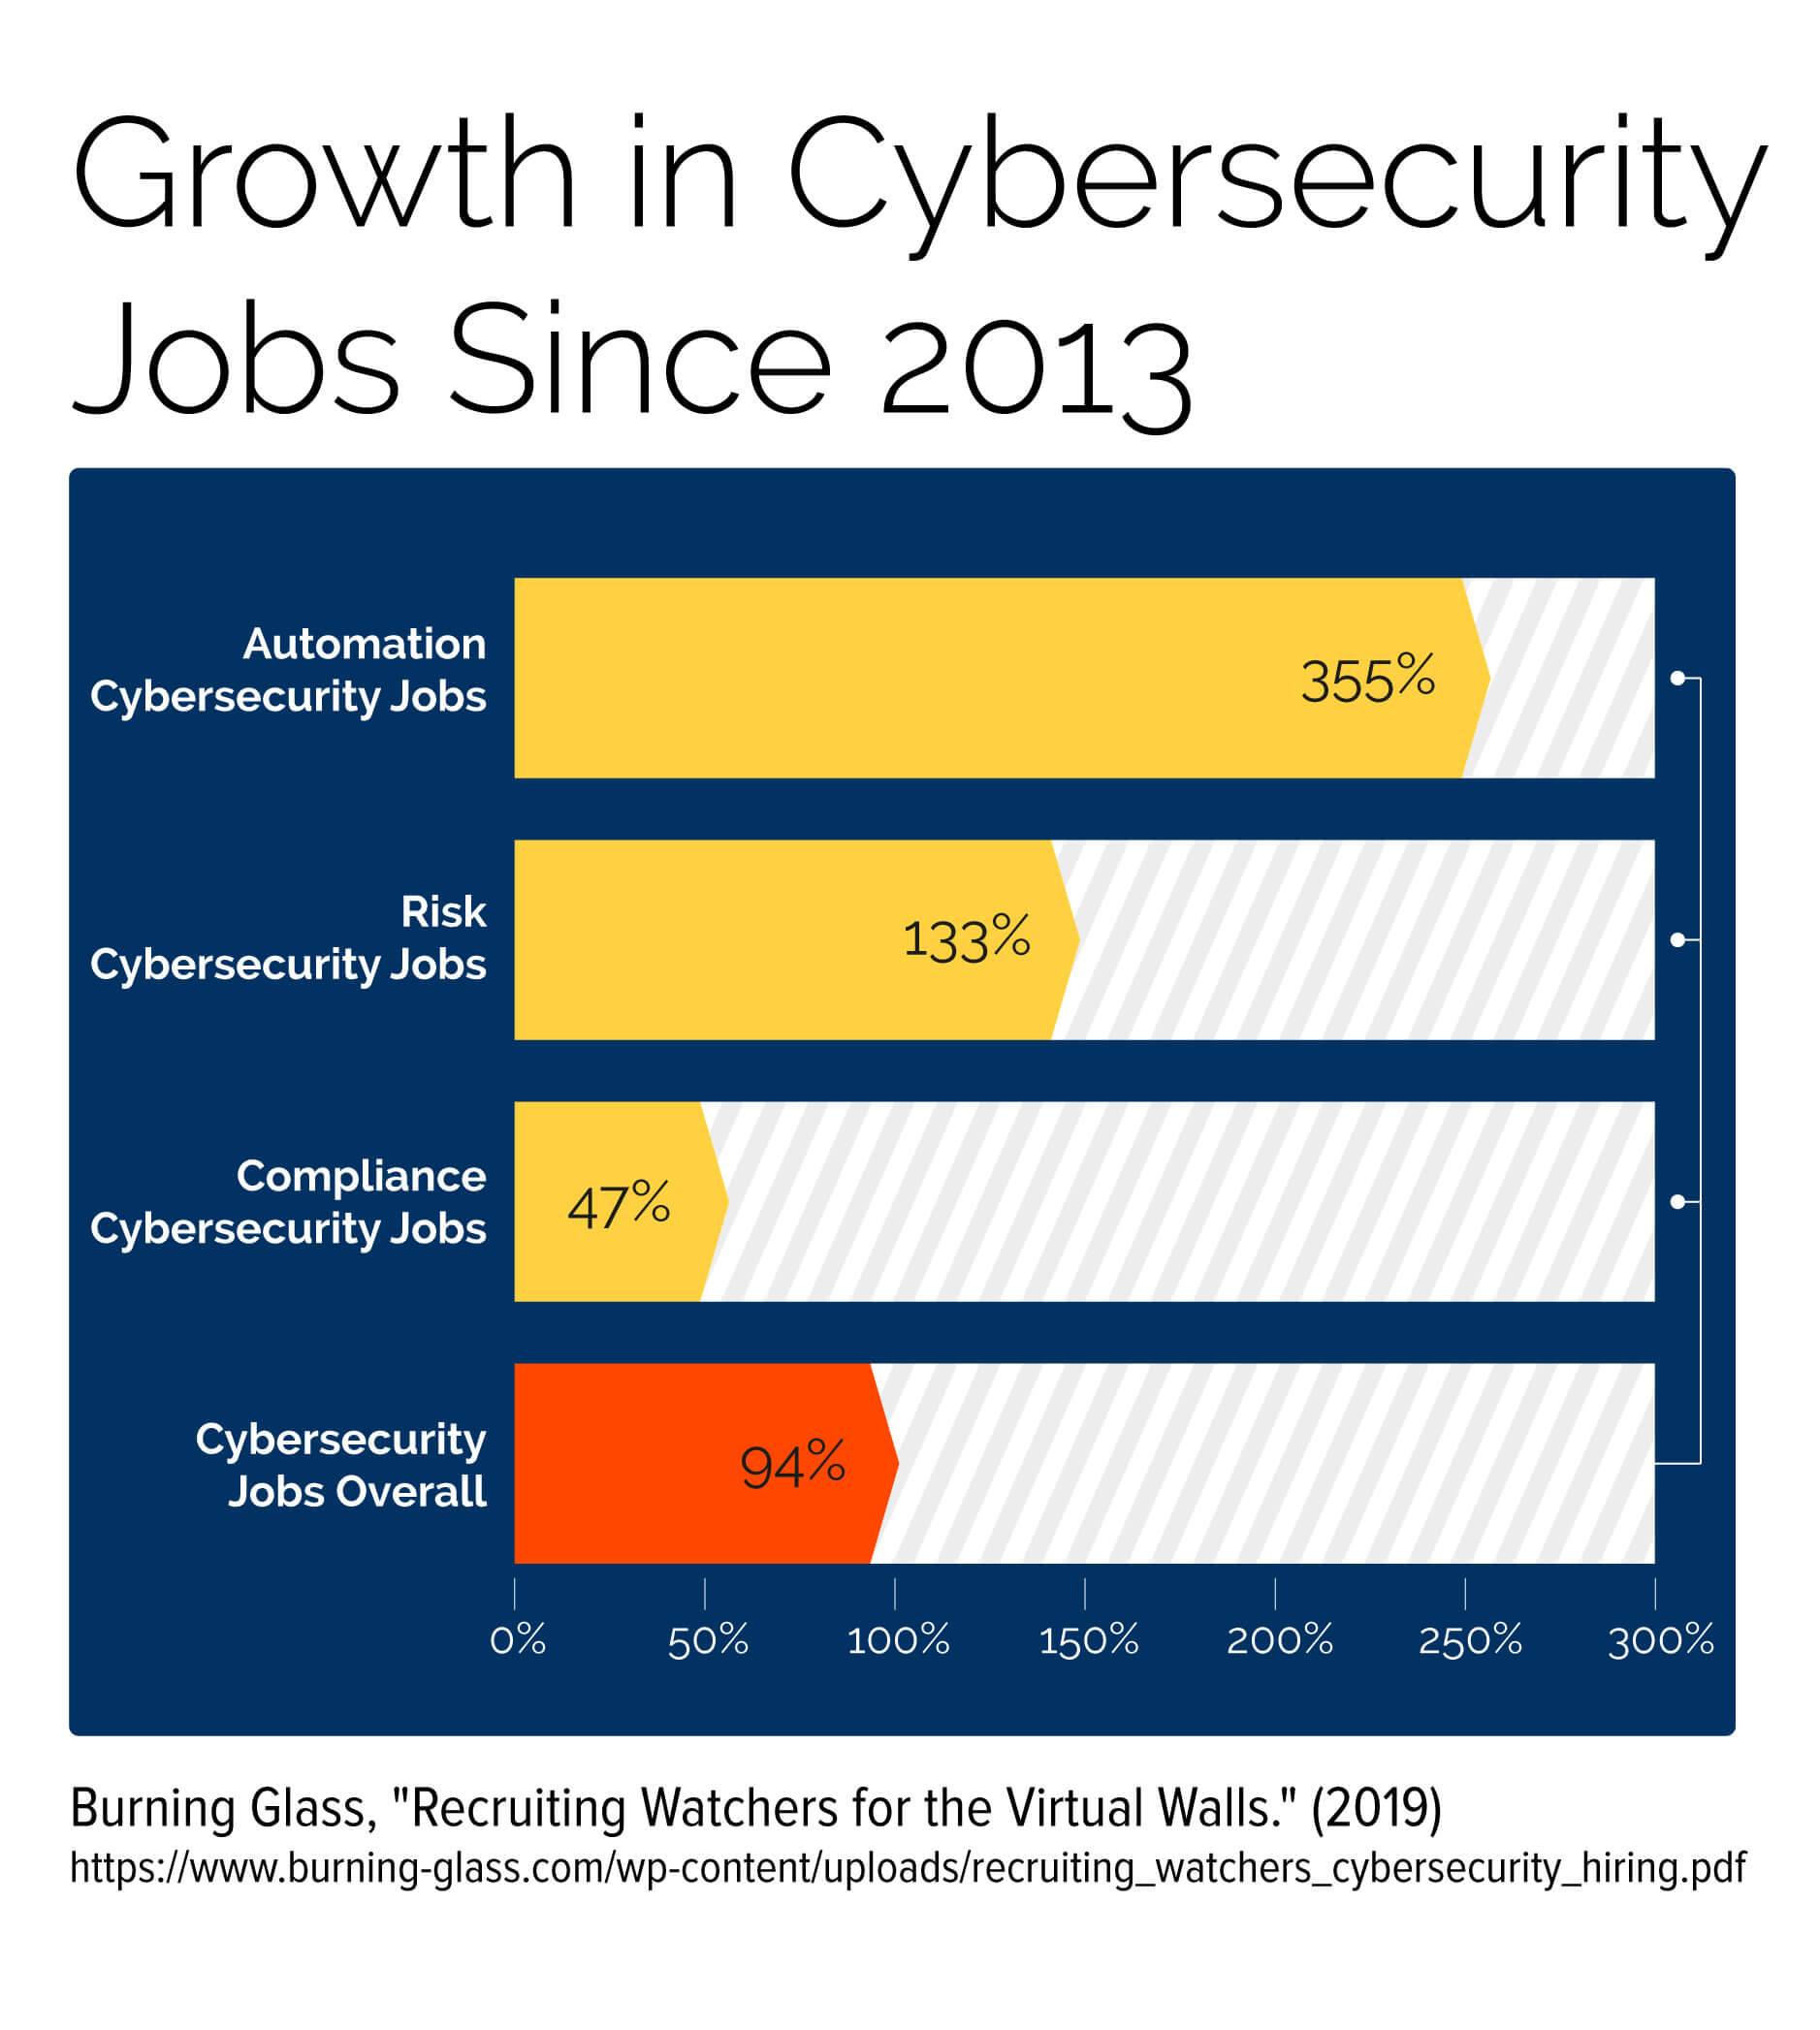 A chart showing the growth in companies hiring cybersecurity professionals